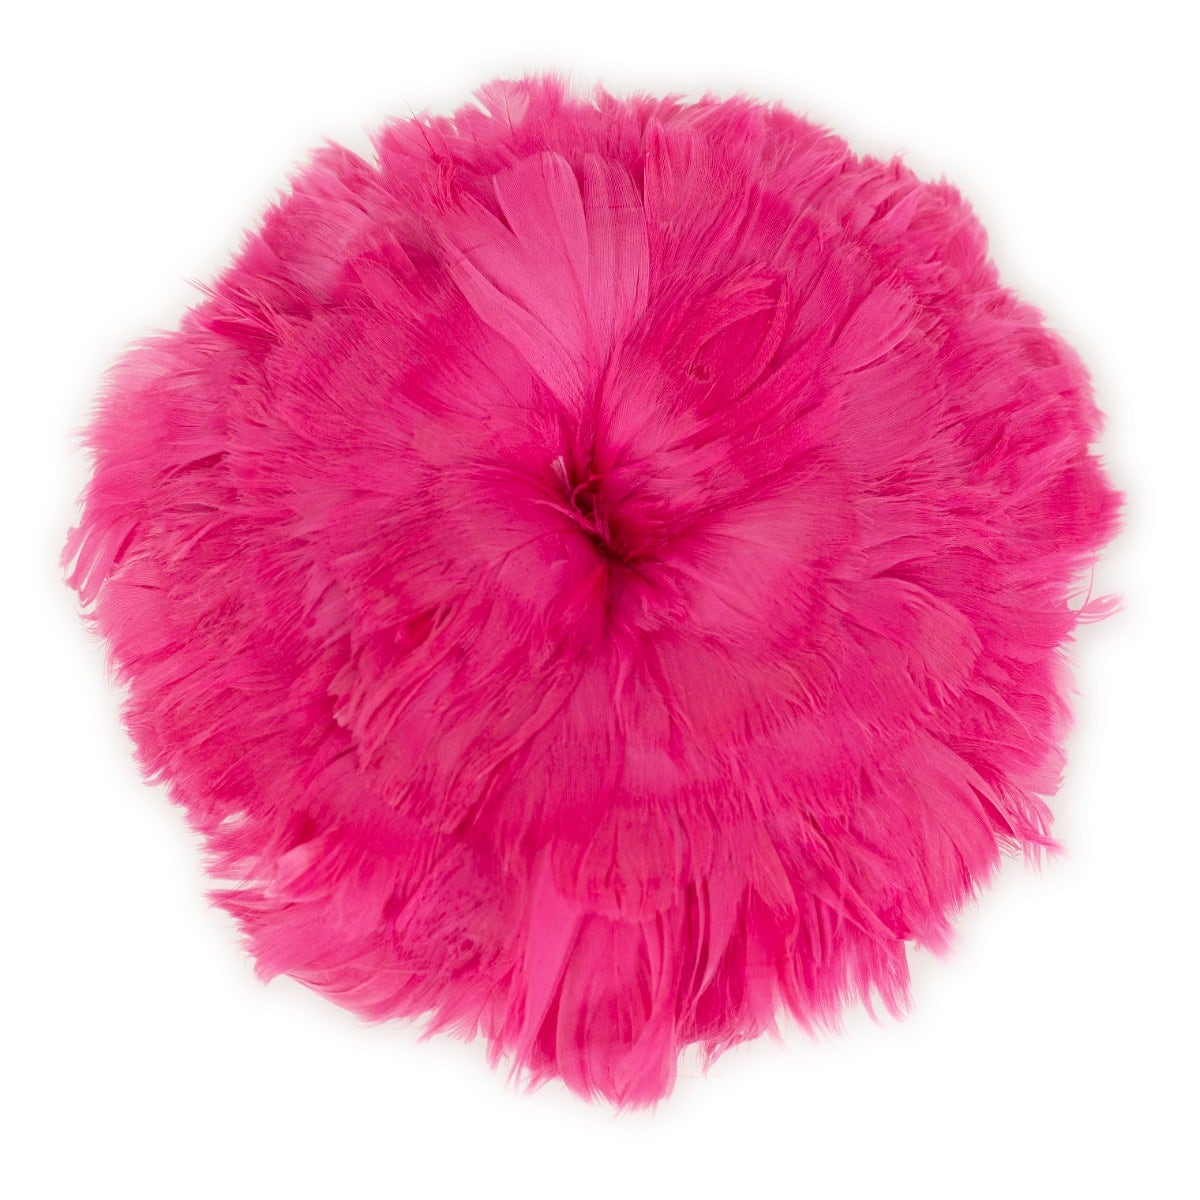 Strung Goose Coquille Feathers 3-4" -- 1/4 lb-Raspberry Sorbet